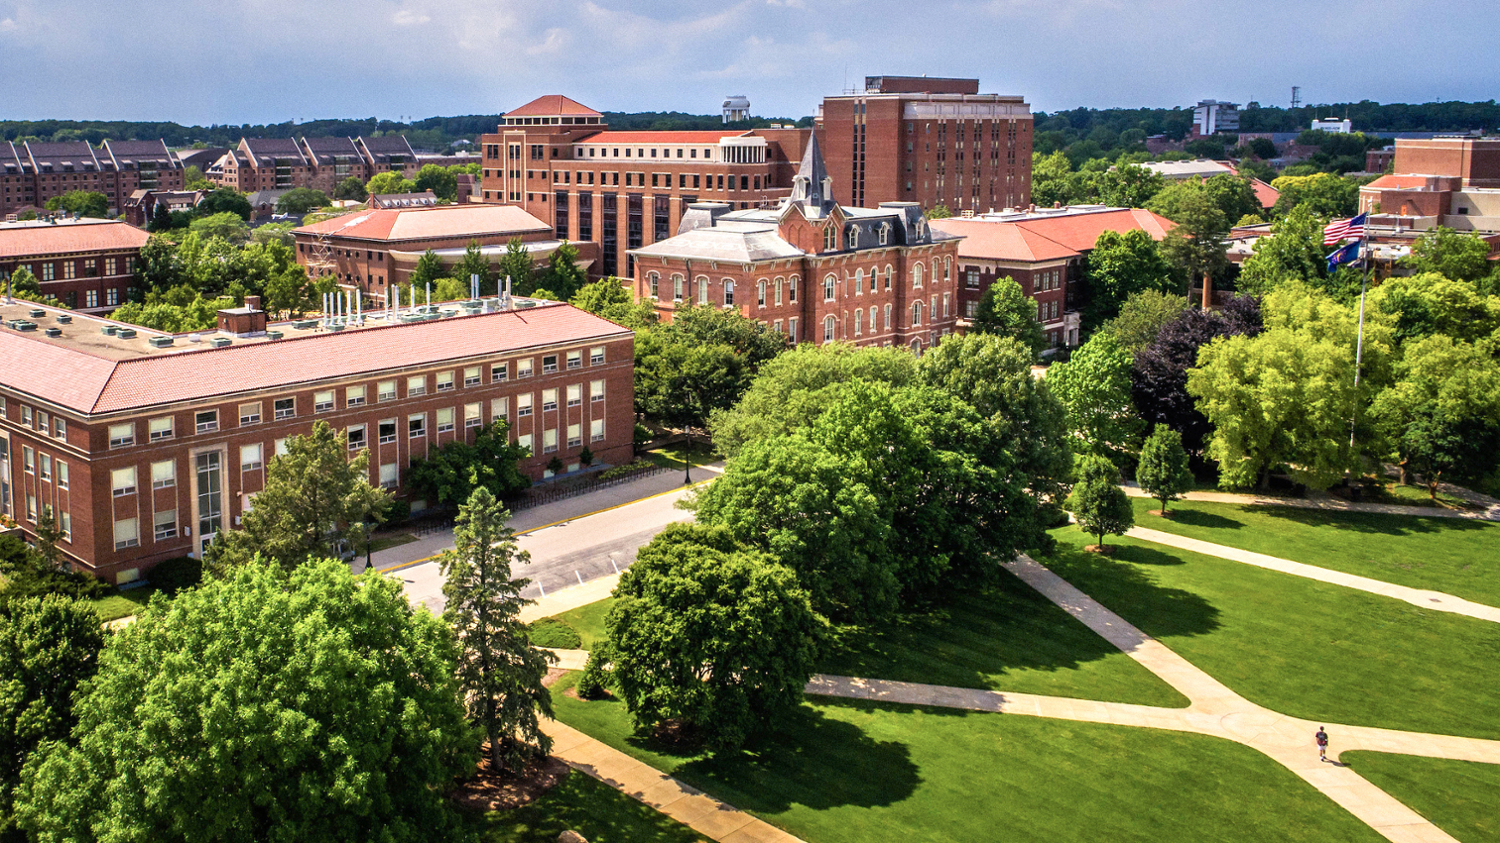 Banner picture: drone image of Purdue University, taken from above, shows trees and grass near campus center